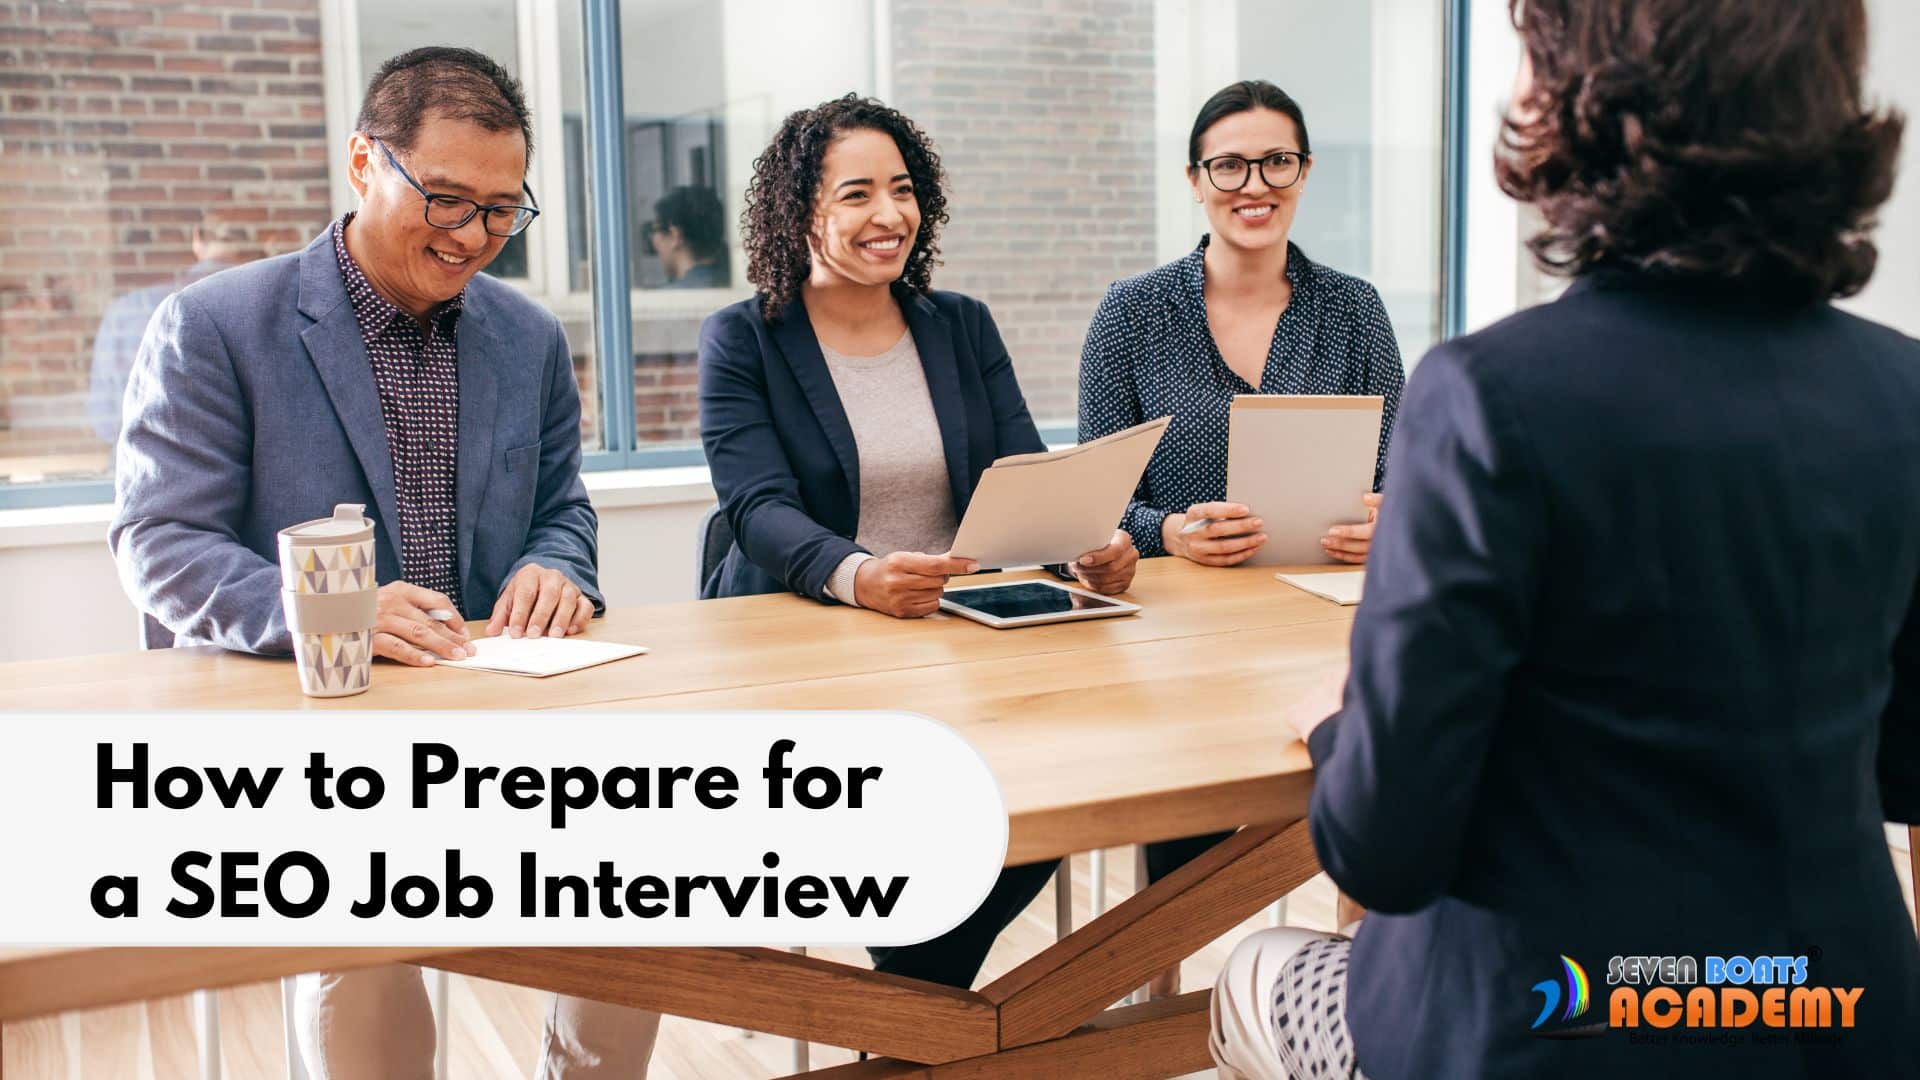 How to Prepare for a SEO Job Interview